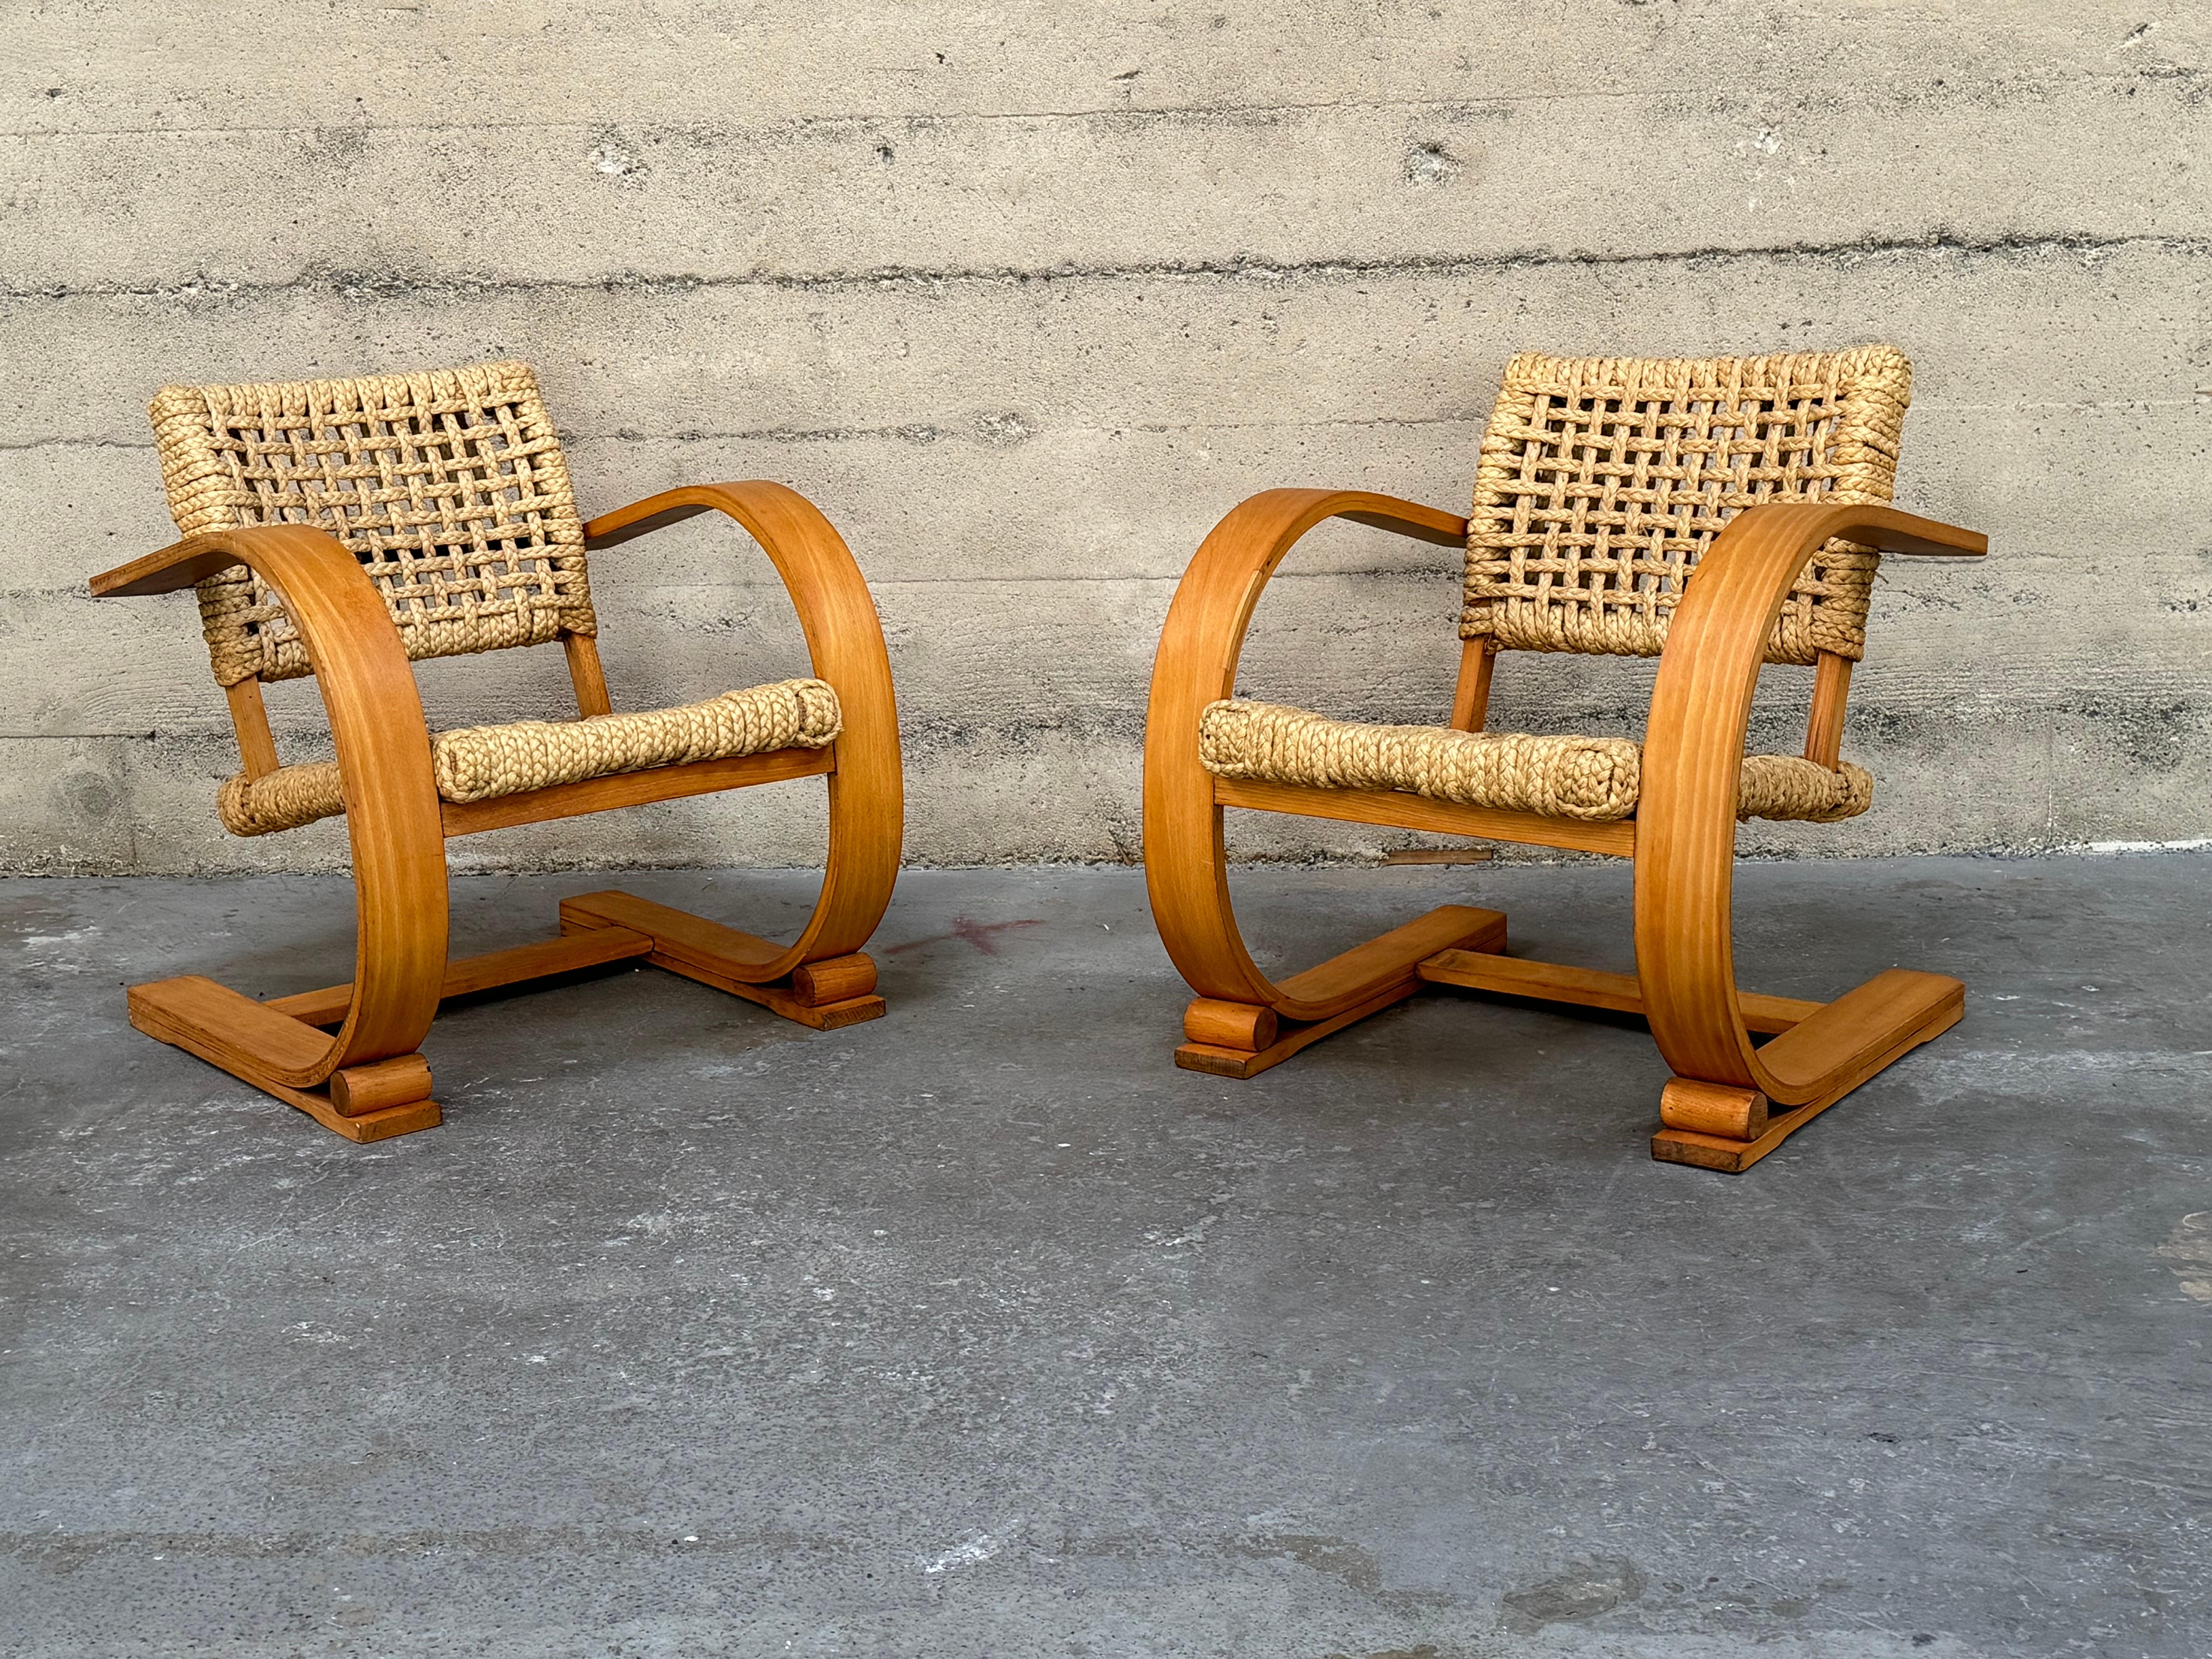 French Midcentury Rope Cantilever Chairs by Audoux & Minet In Good Condition For Sale In Oakland, CA